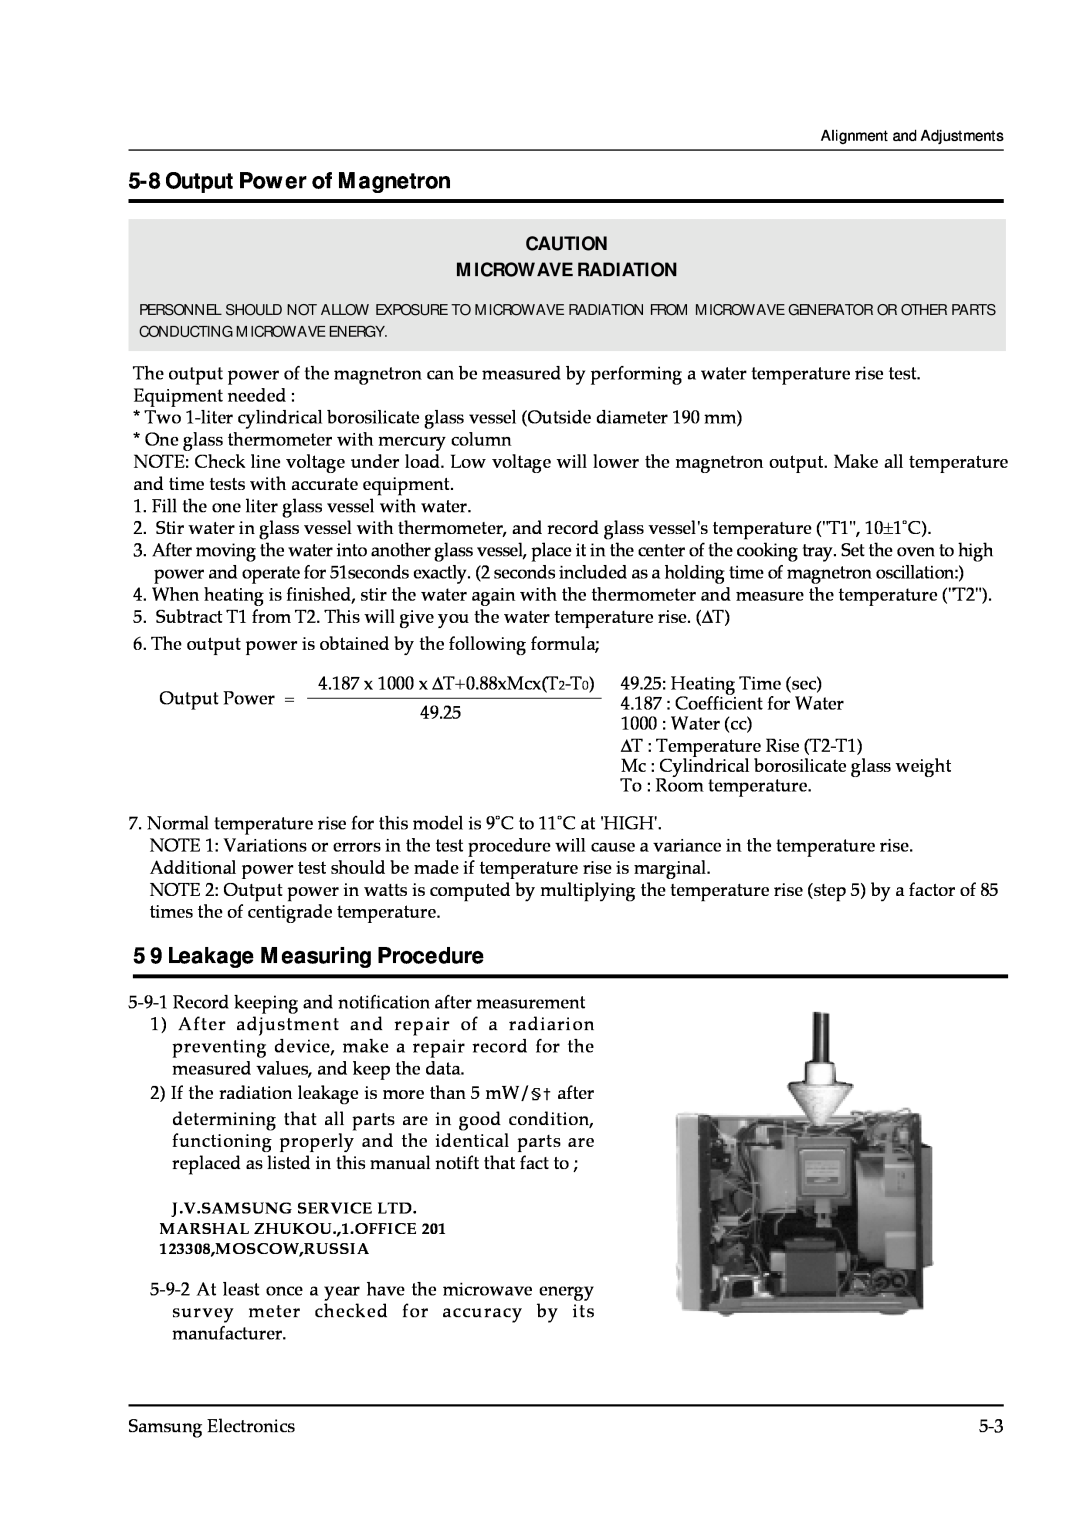 Samsung CE745GR service manual Output Power of Magnetron, 5 9 Leakage Measuring Procedure, Microwave Radiation 